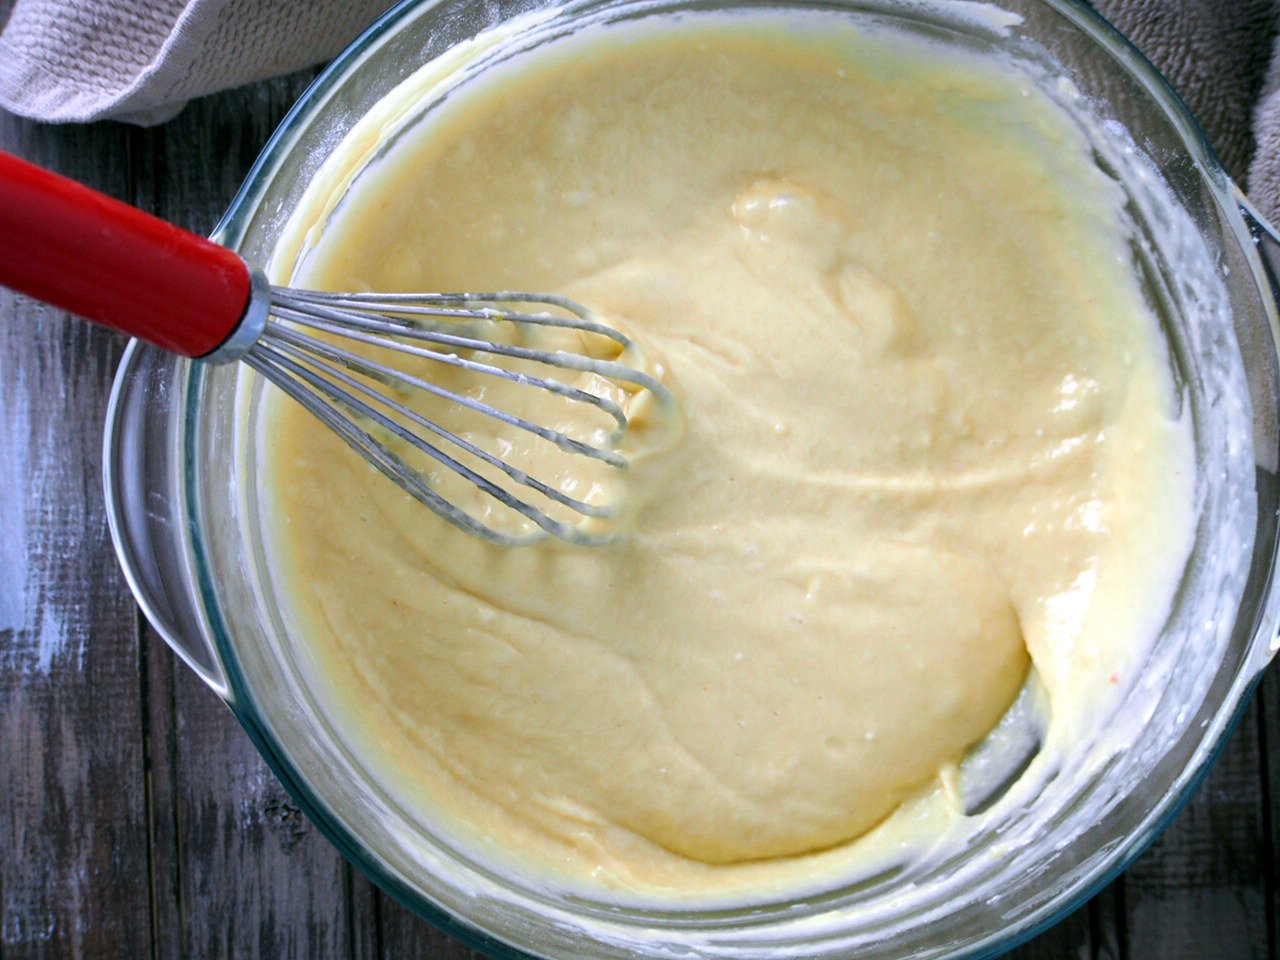 The flour mixture is added to the yolk batter to make a thick batter.